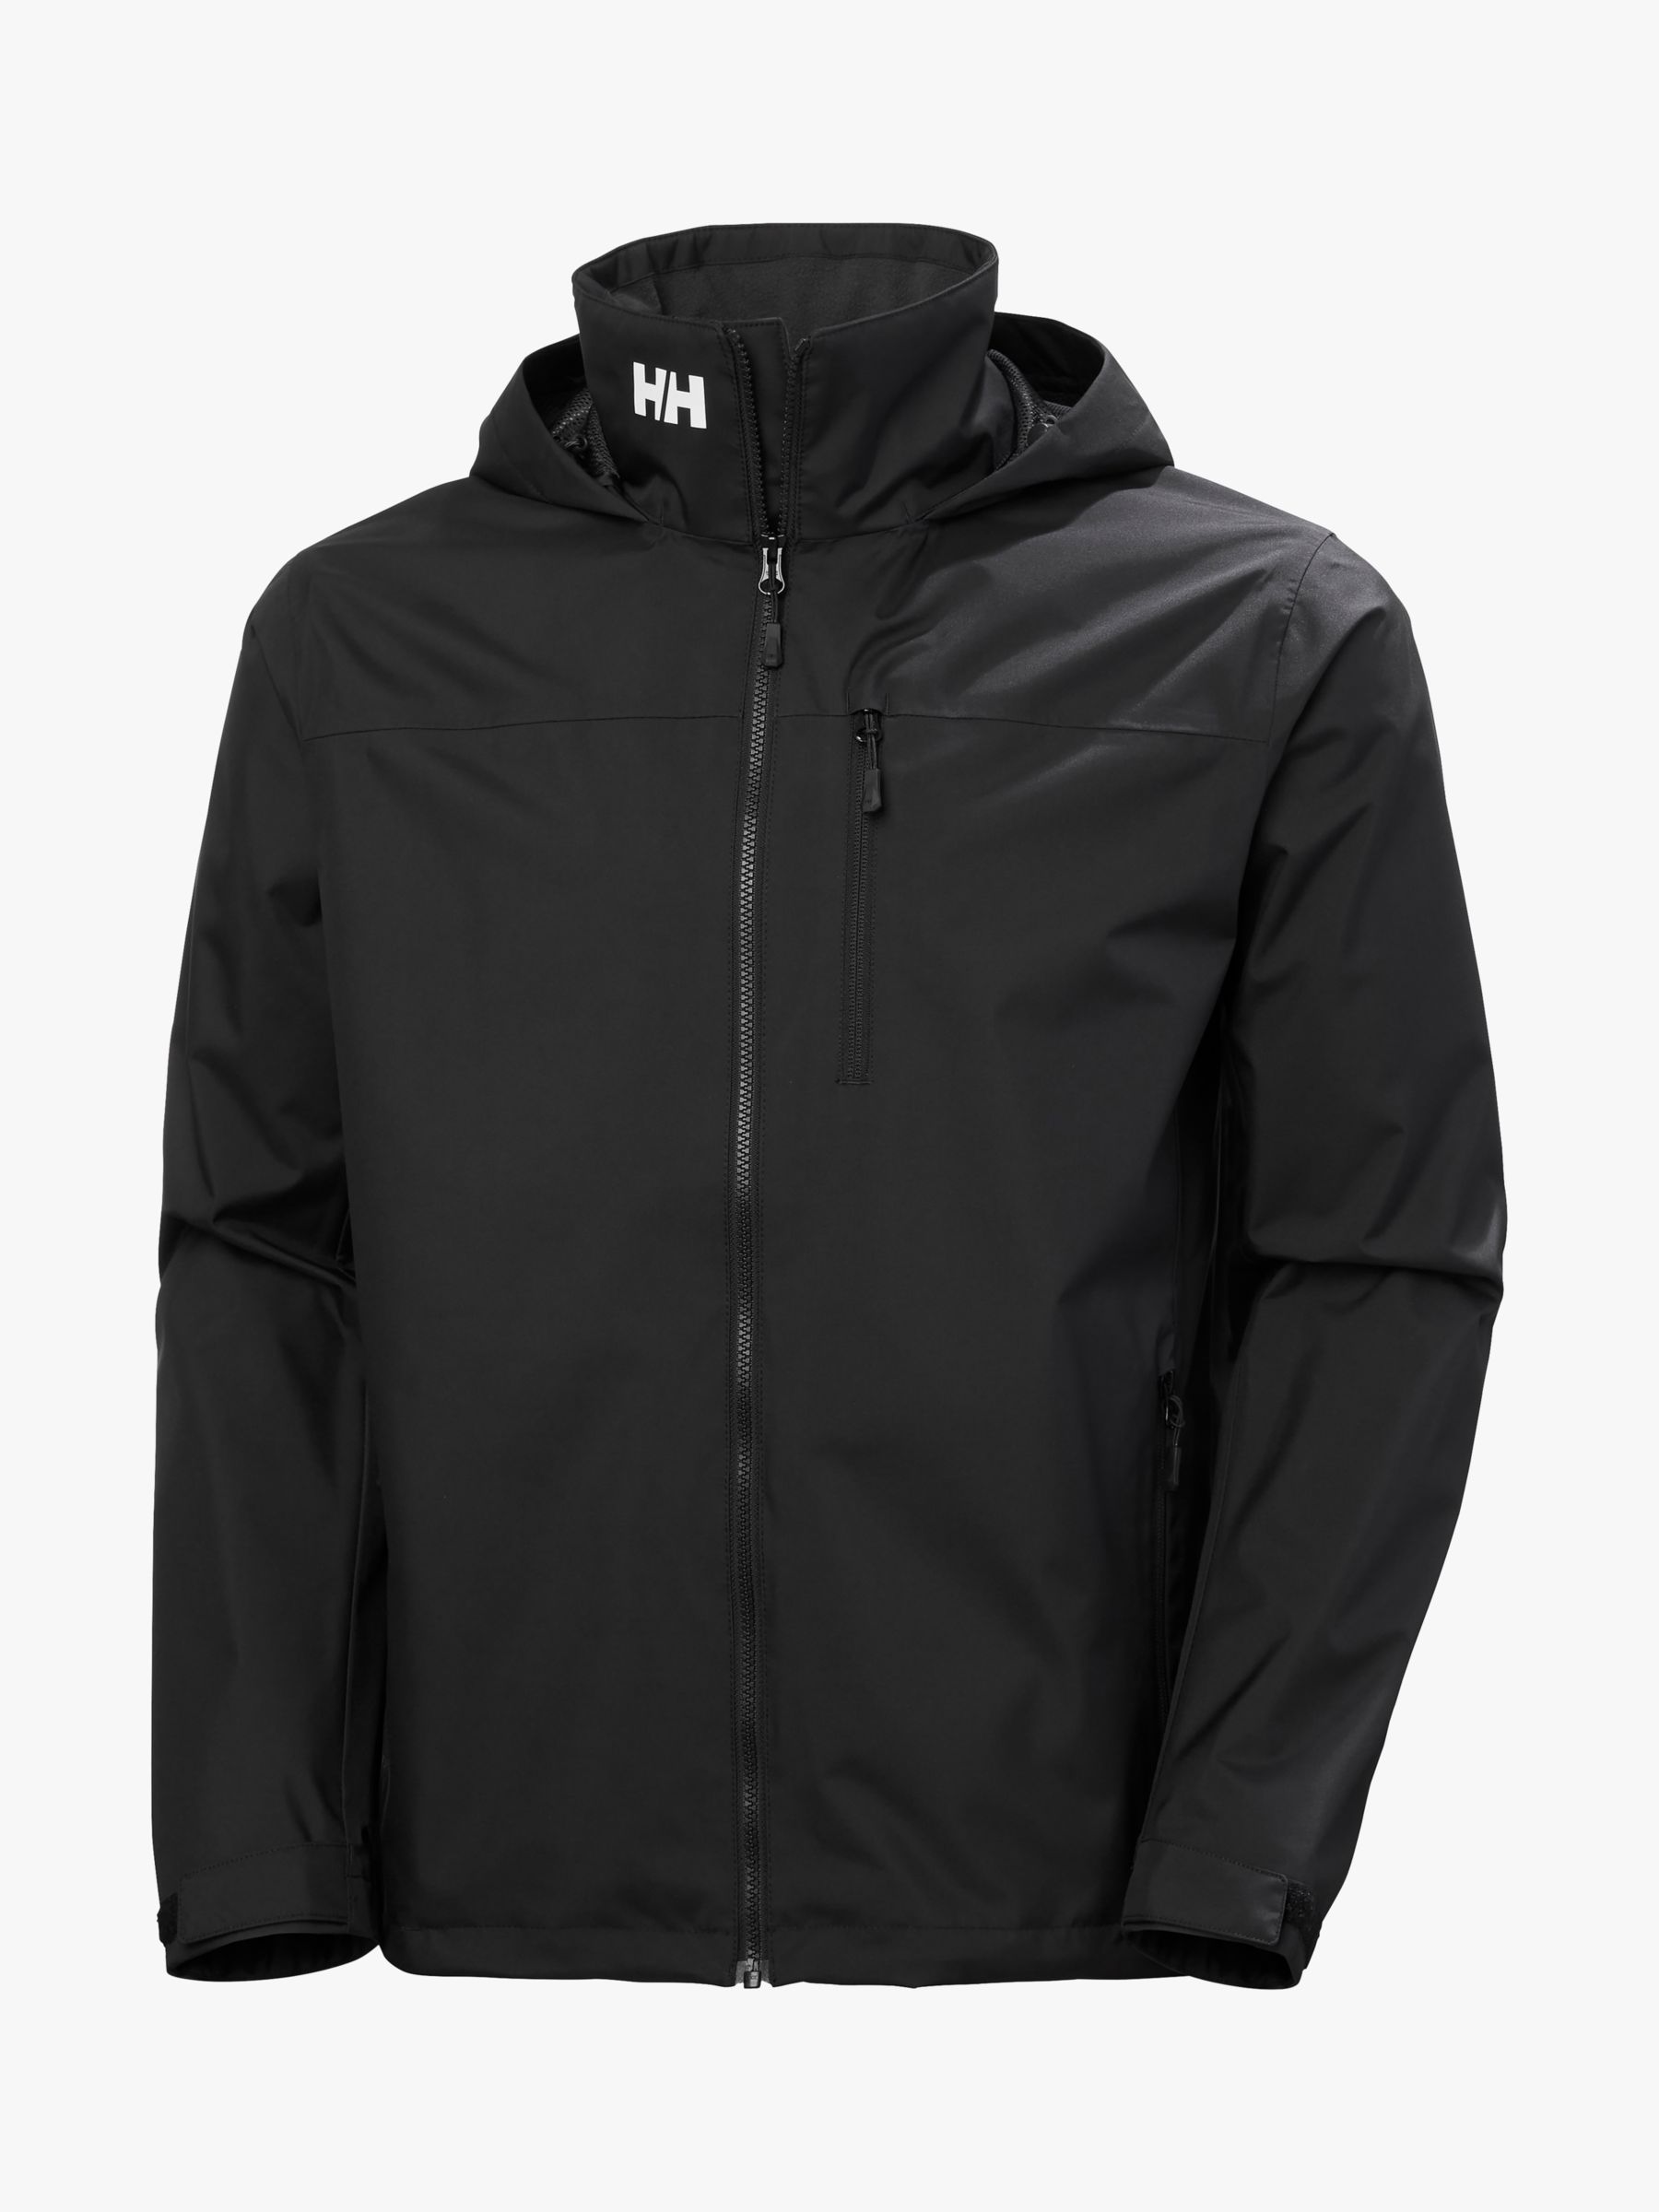 Buy Helly Hansen Classic Shell Sailing Jacket Online at johnlewis.com